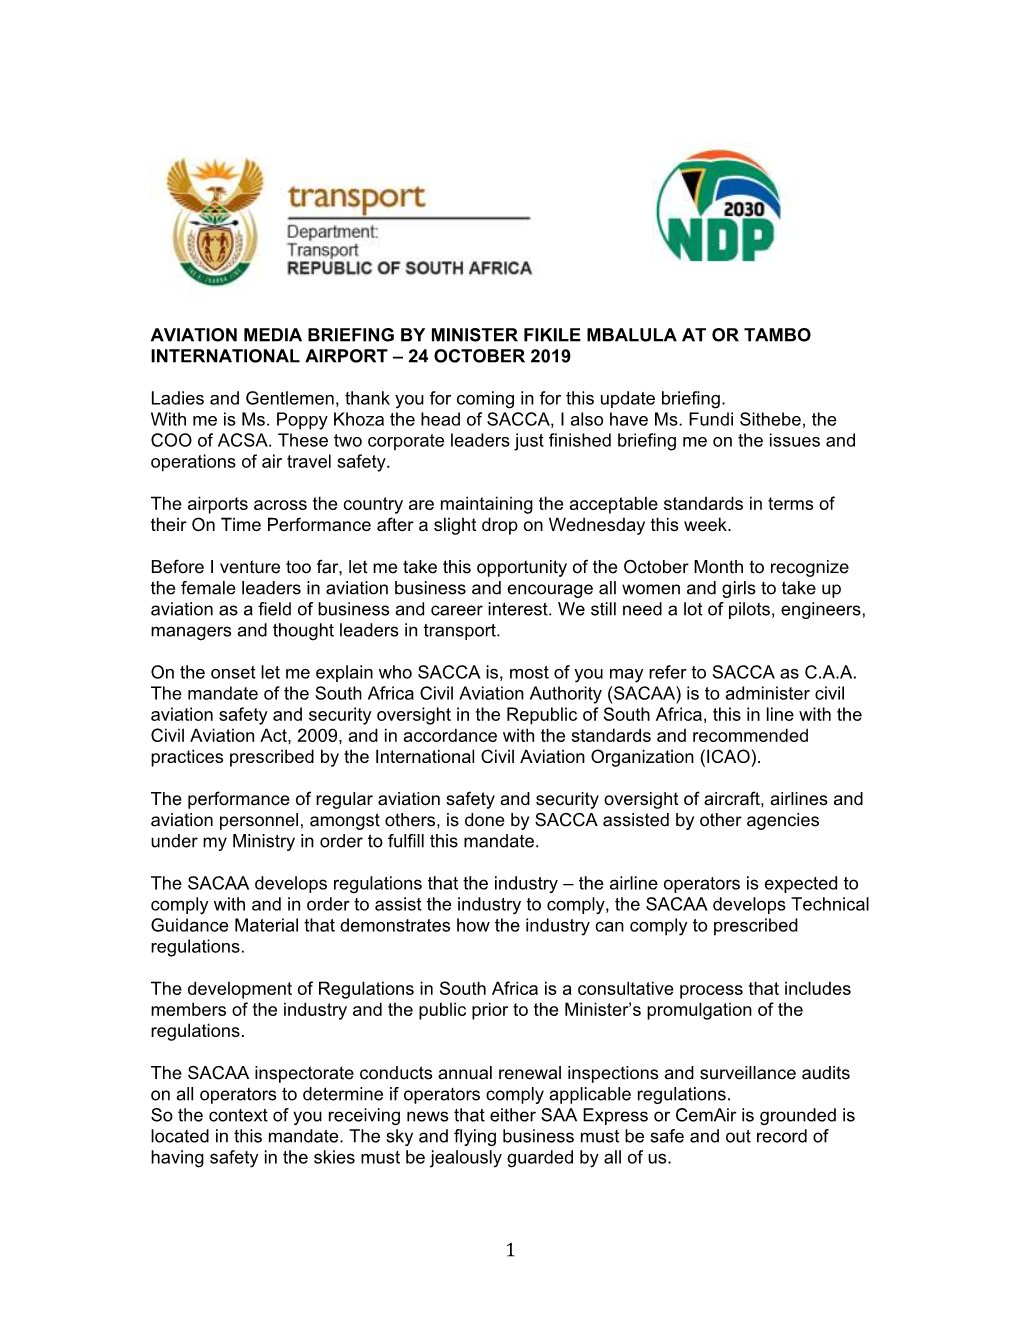 Aviation Media Briefing by Minister Fikile Mbalula at Or Tambo International Airport – 24 October 2019